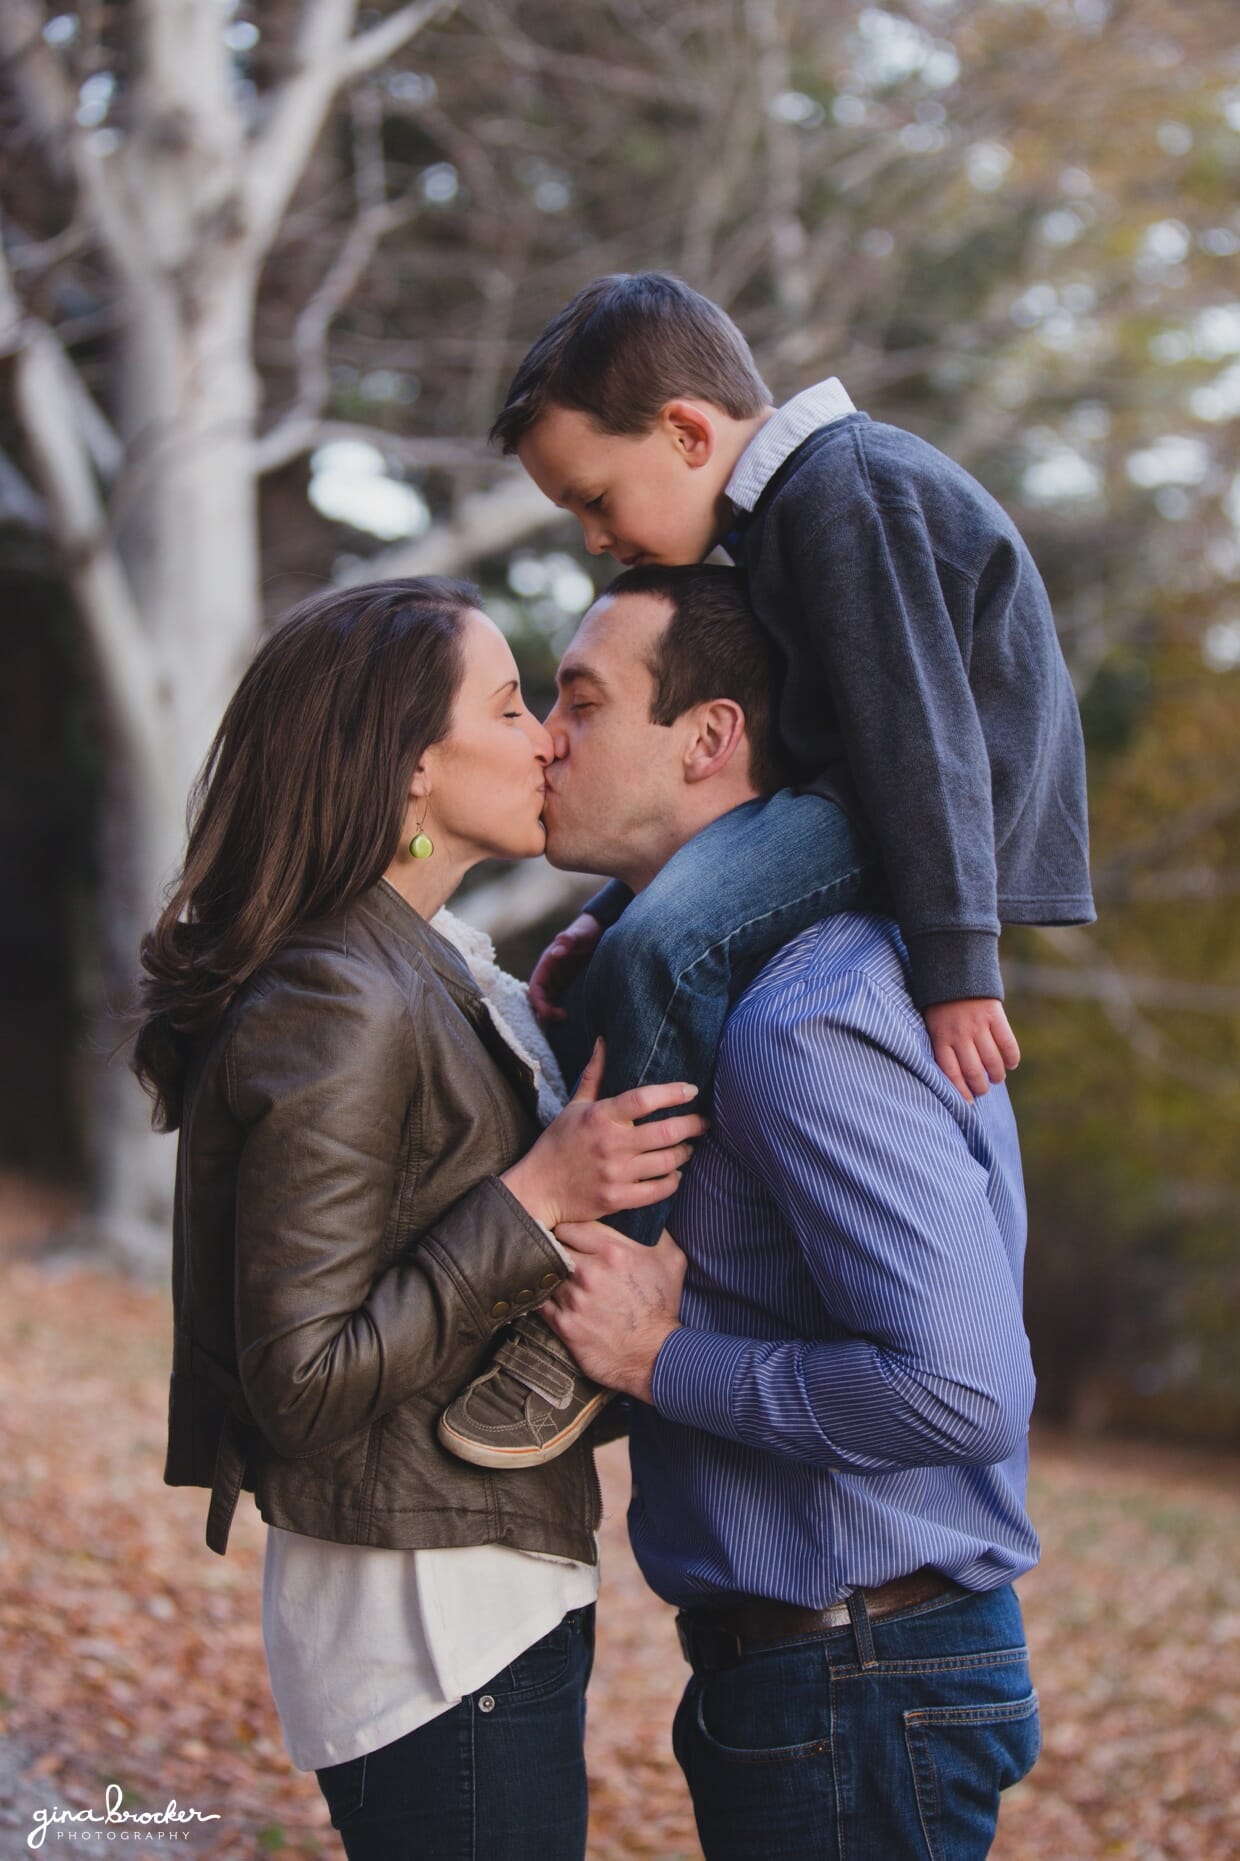 A cute portrait of a family during their natural family photo session in Boston's Arnold Arboretum